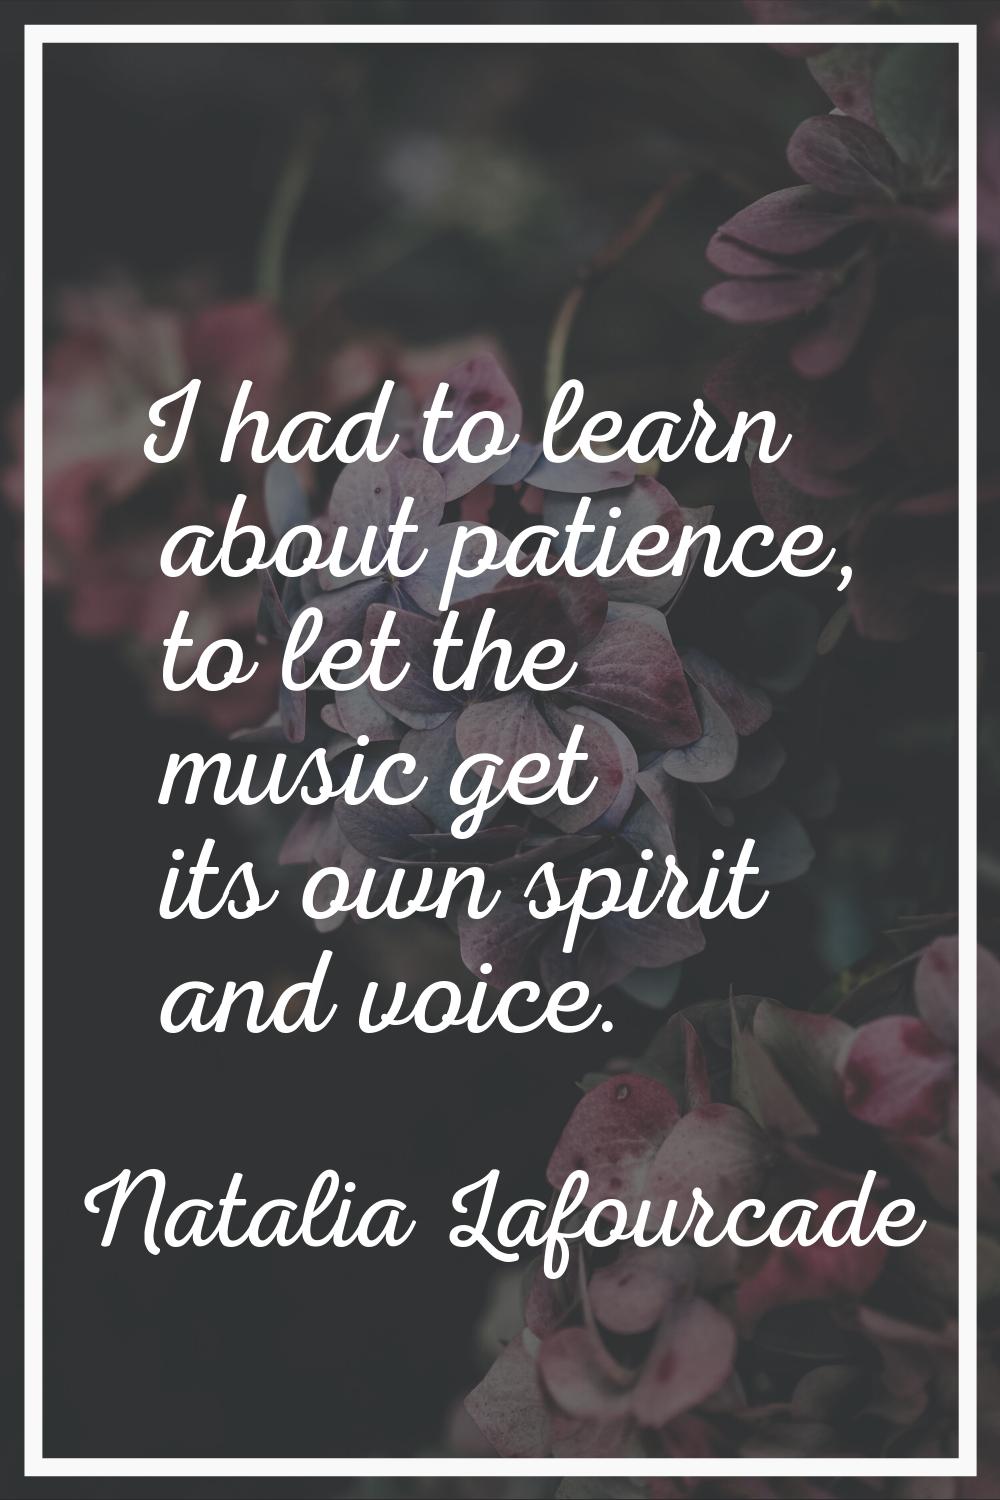 I had to learn about patience, to let the music get its own spirit and voice.